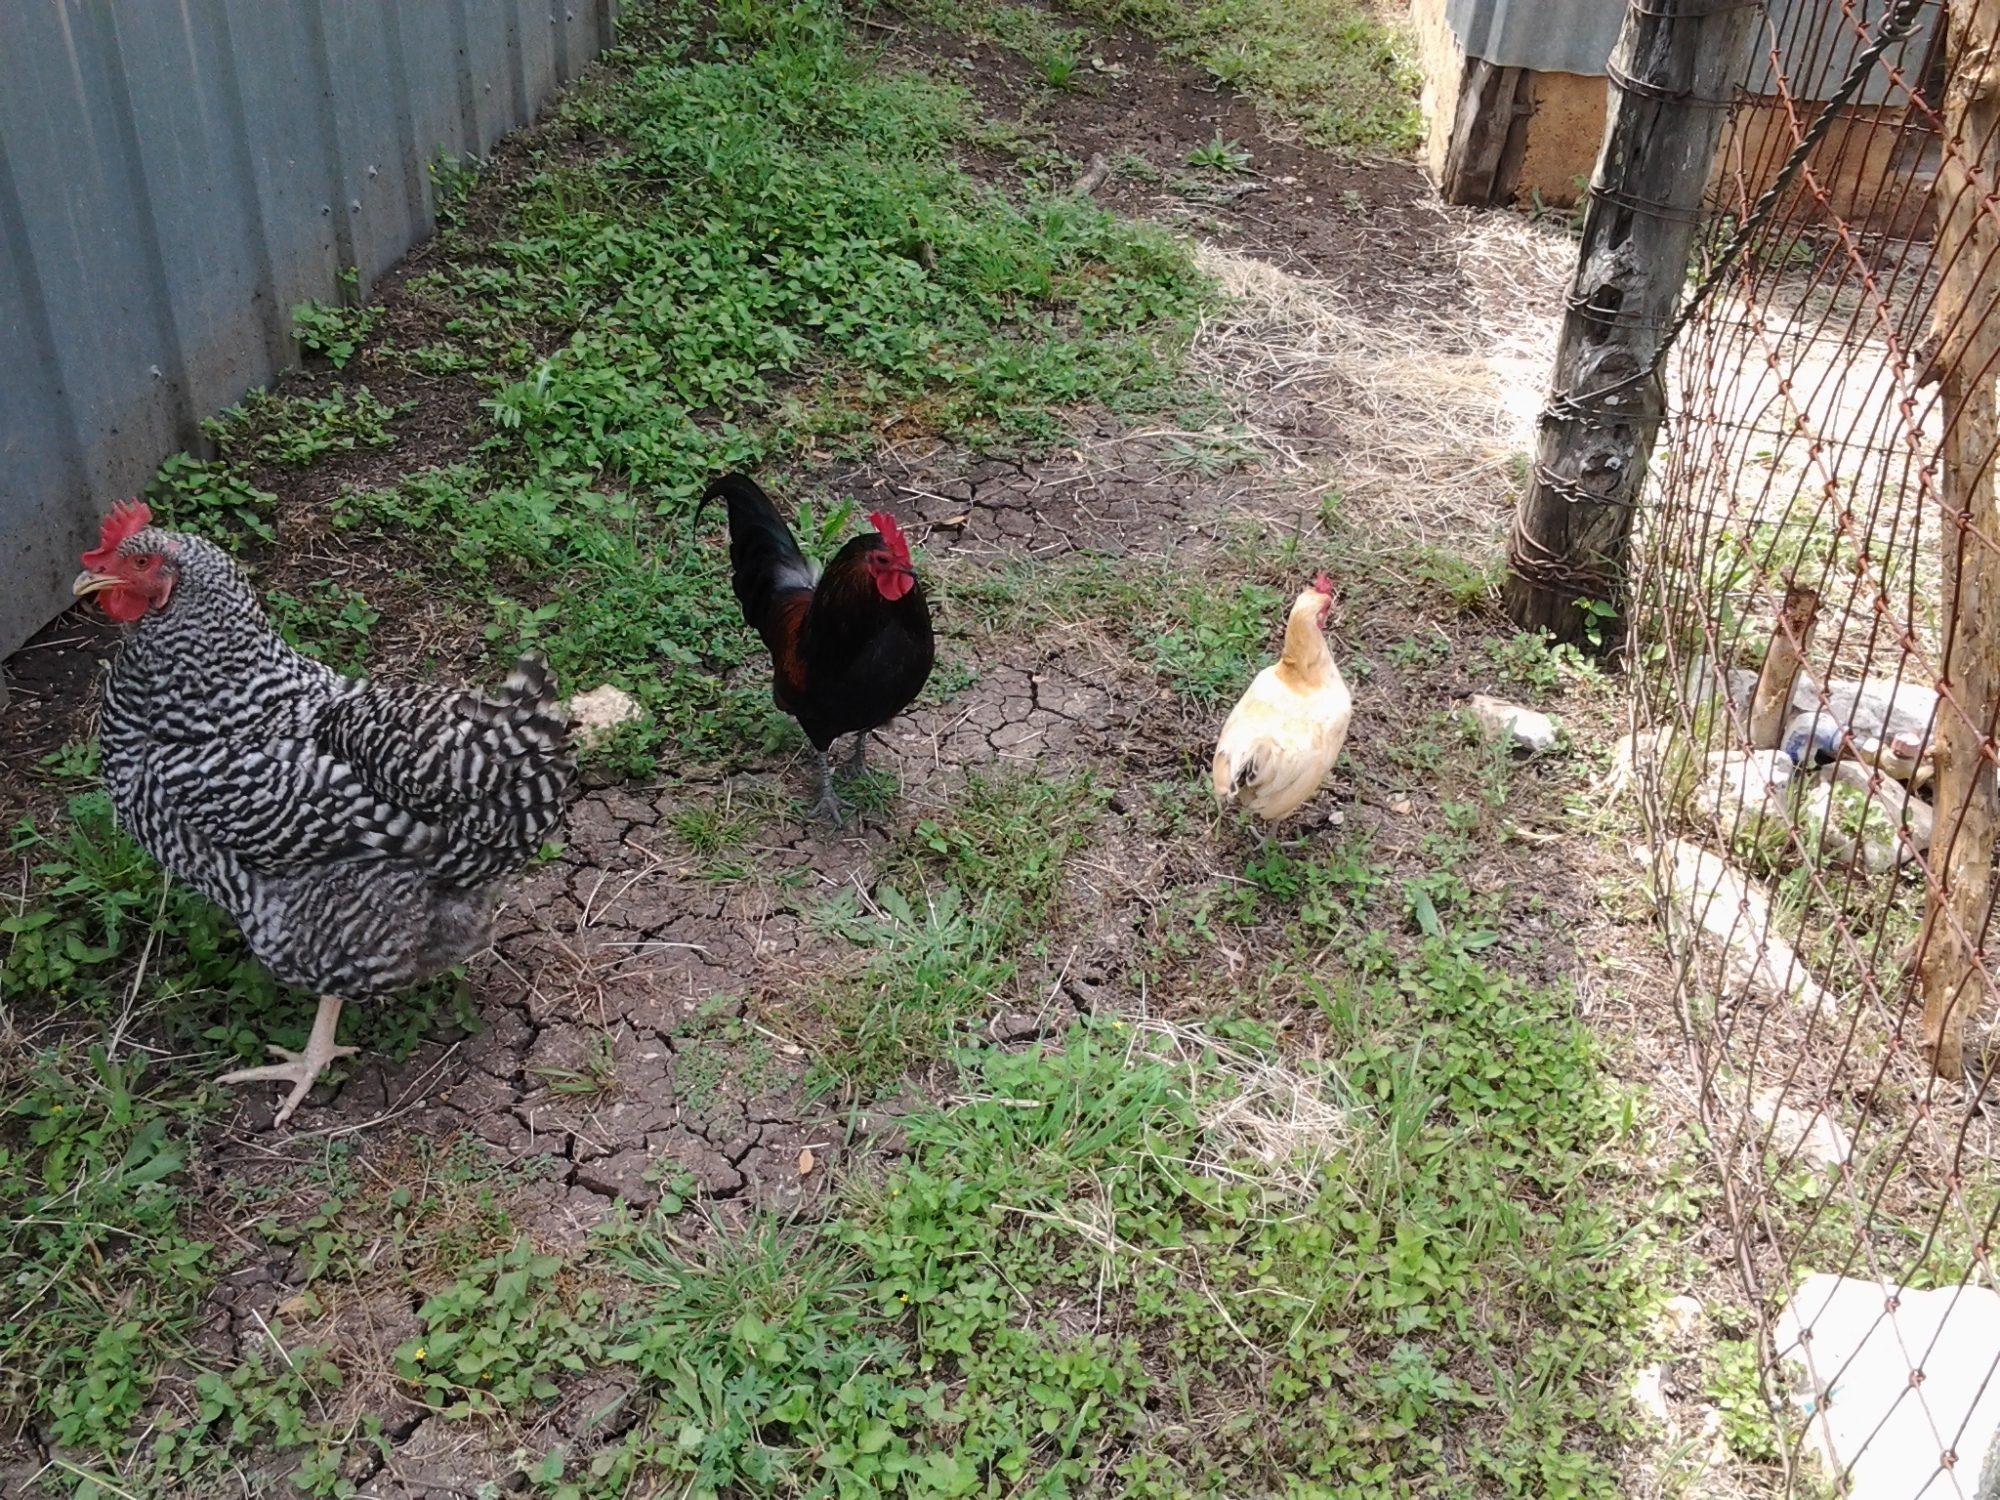 Sara is my Barred Rock, Goldie is my little broody bantam and Sal (Salvadore) is our bantam roo.